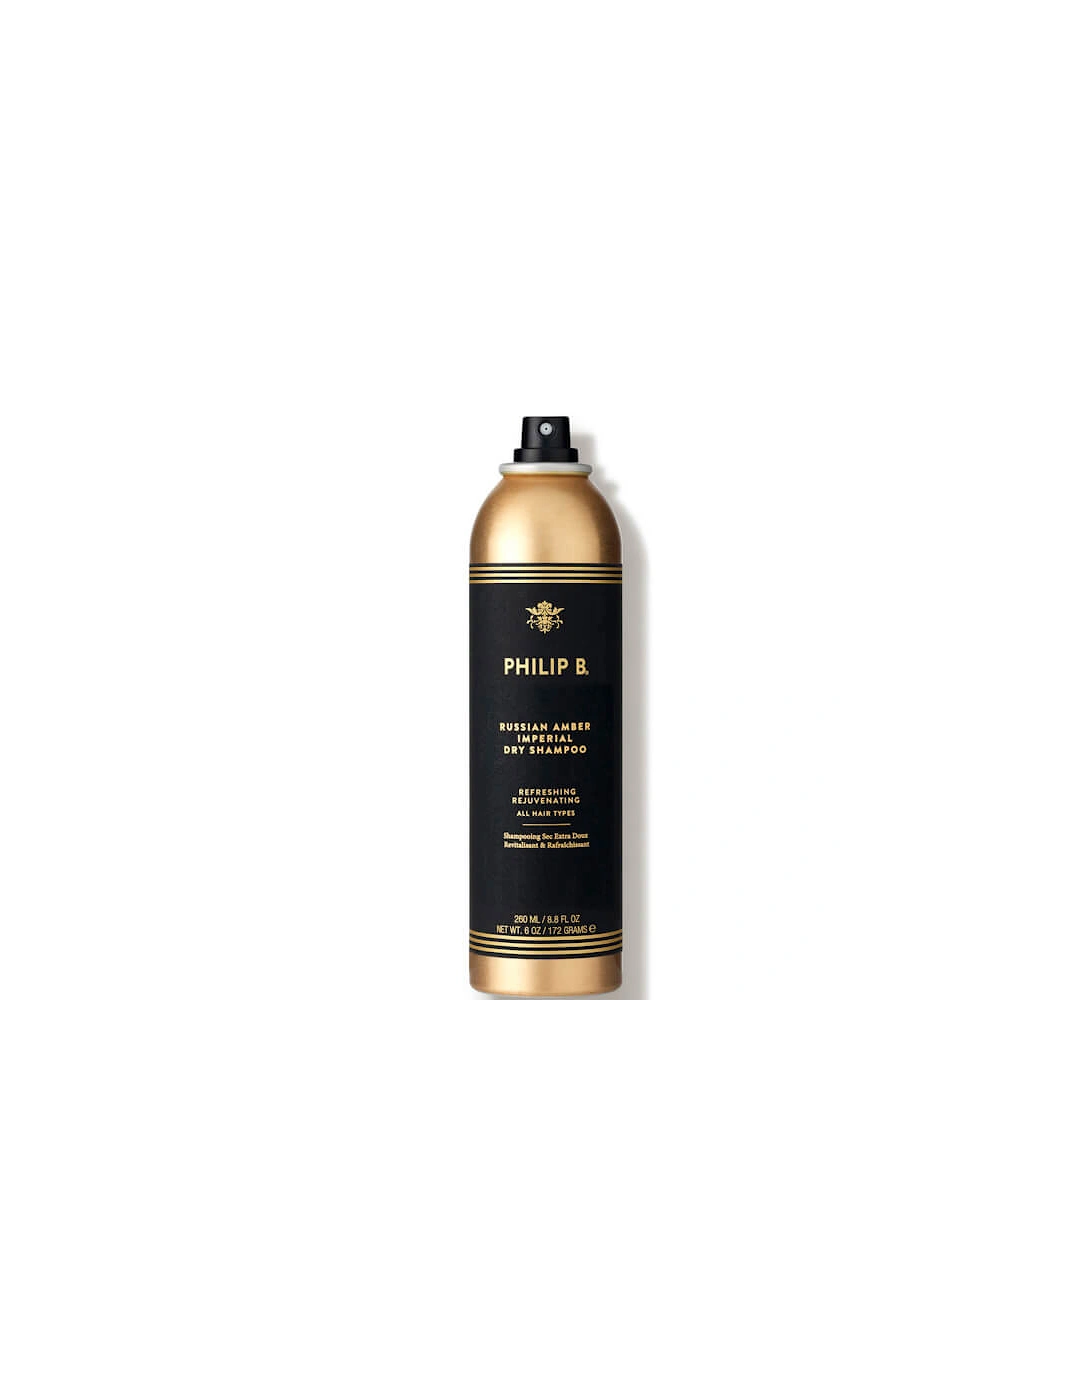 Russian Amber Imperial Dry Shampoo (260ml) - Philip B, 2 of 1